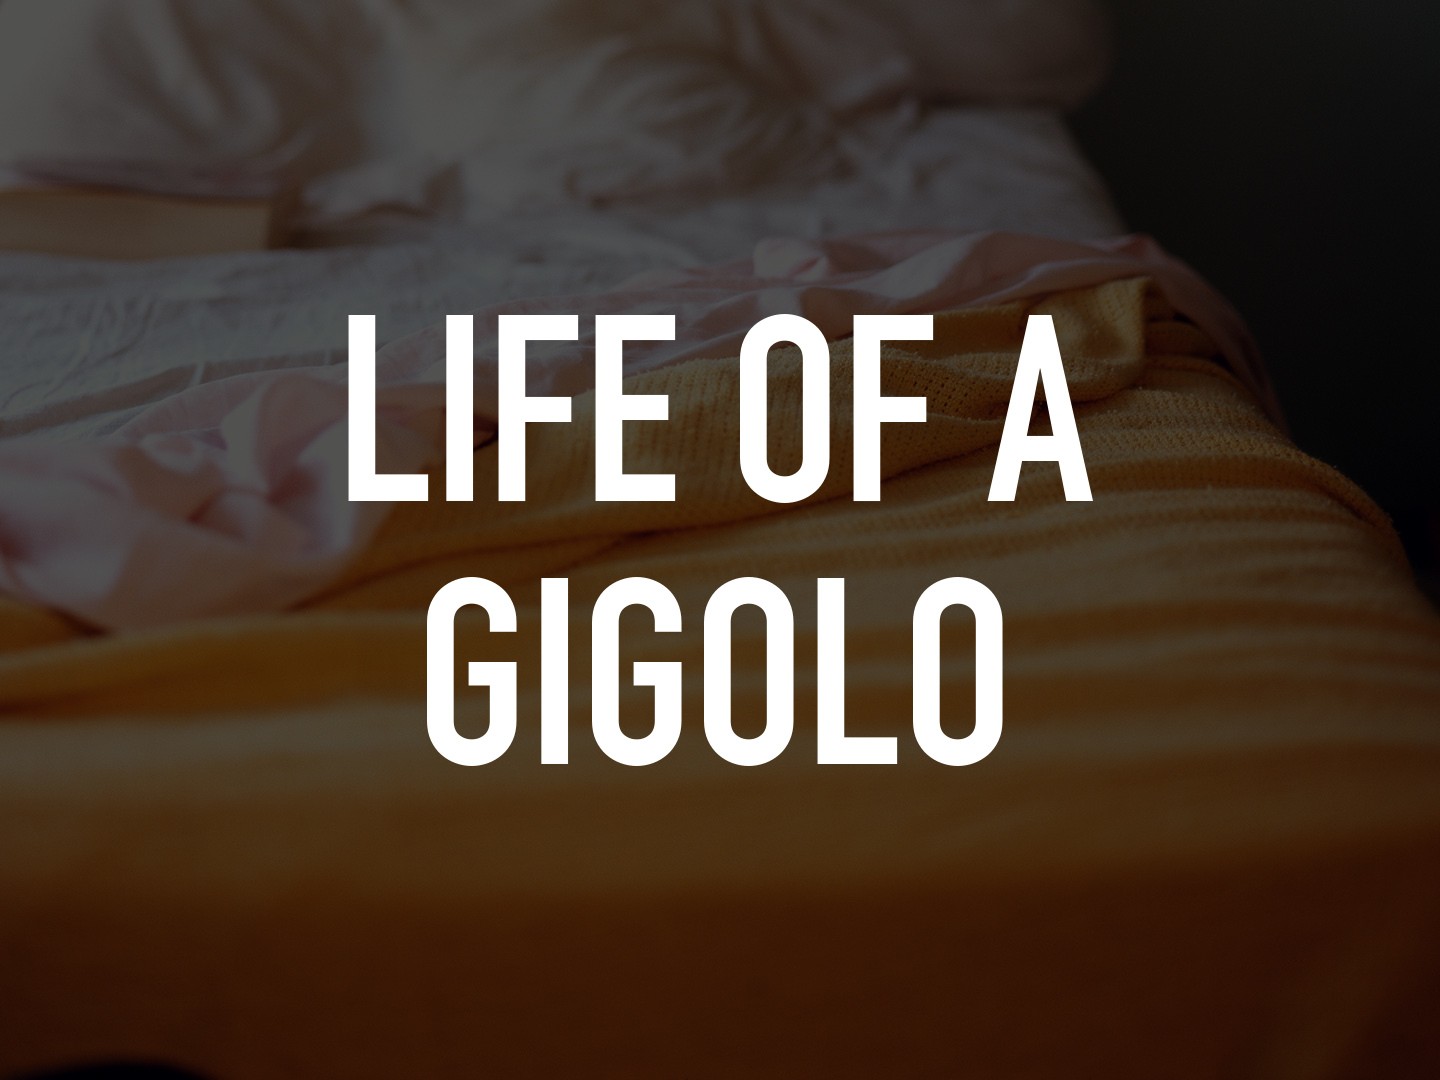 Best of Life of gigolo movie